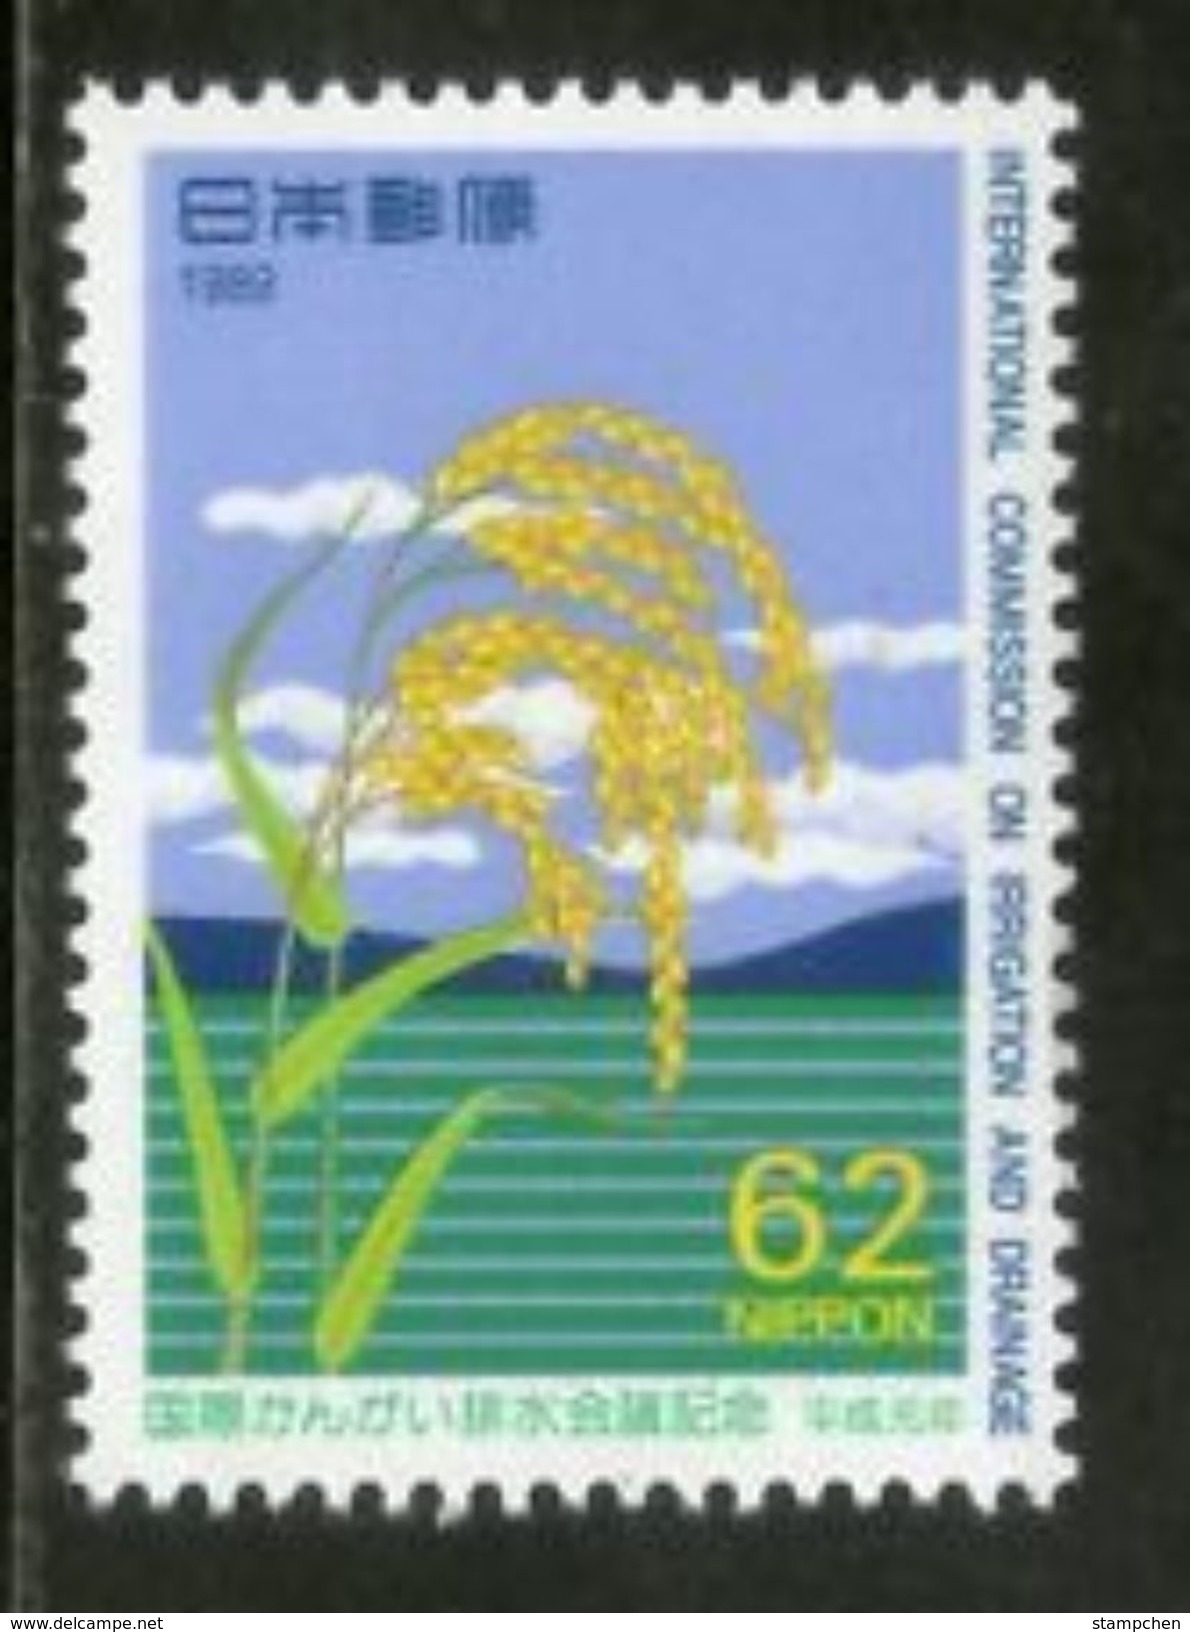 Japan 1989 Irrigation & Drainage Conference Stamp Rice Farm Cloud - Agricultura